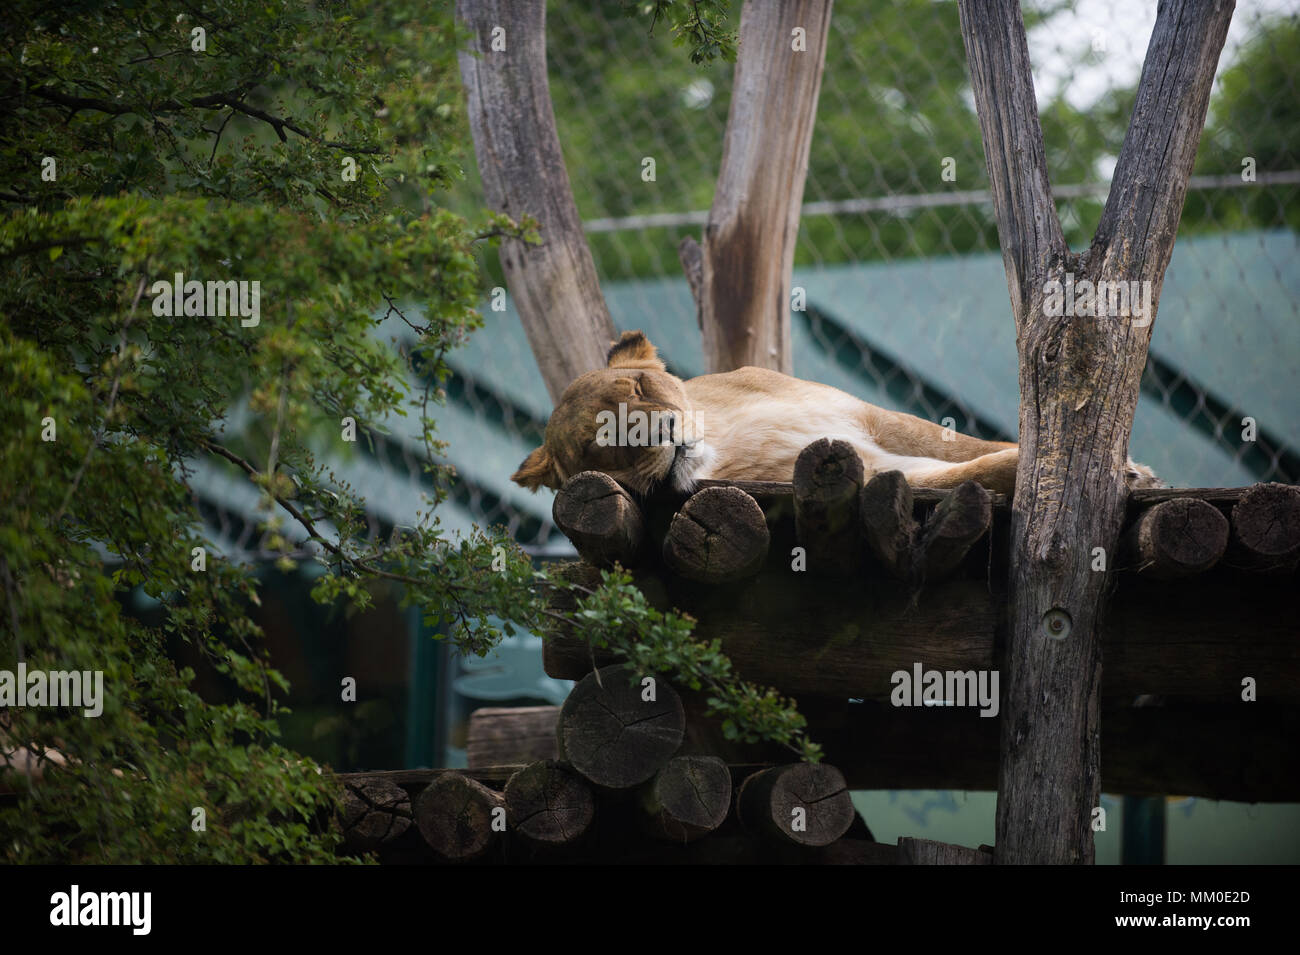 A lion takes a nap at Tiergarten Schoenbrunn Zoo in Vienna. The Tiergarten Schoenbrunn Zoo was founded in 1752, and it is the oldest operating zoo in the world. Stock Photo